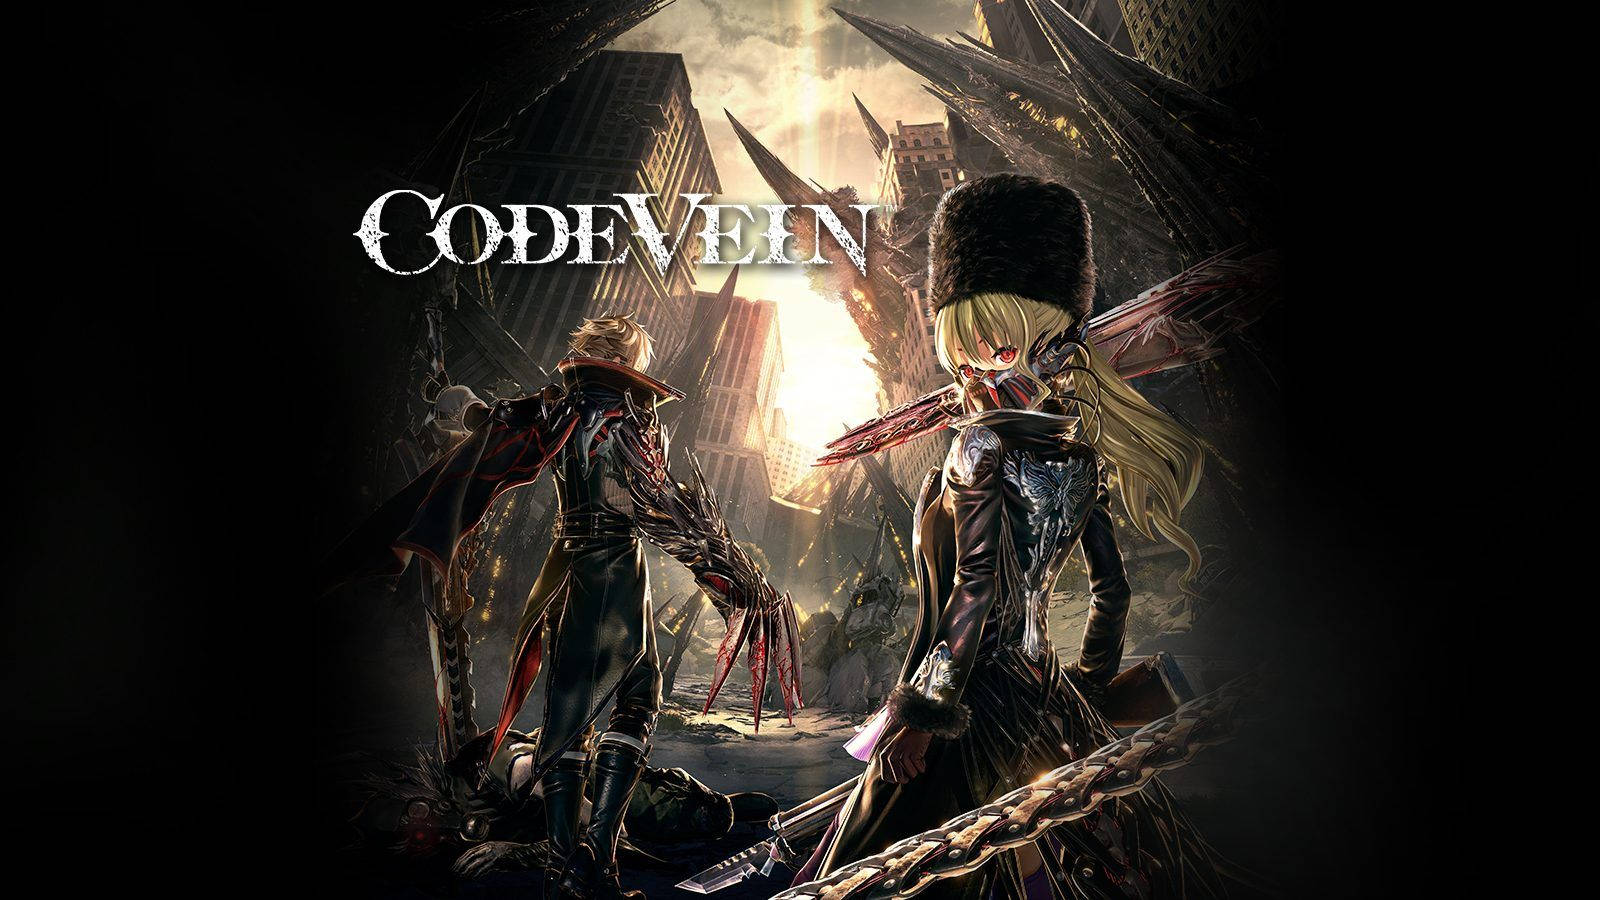 Code Vein Playable Demo Now Available